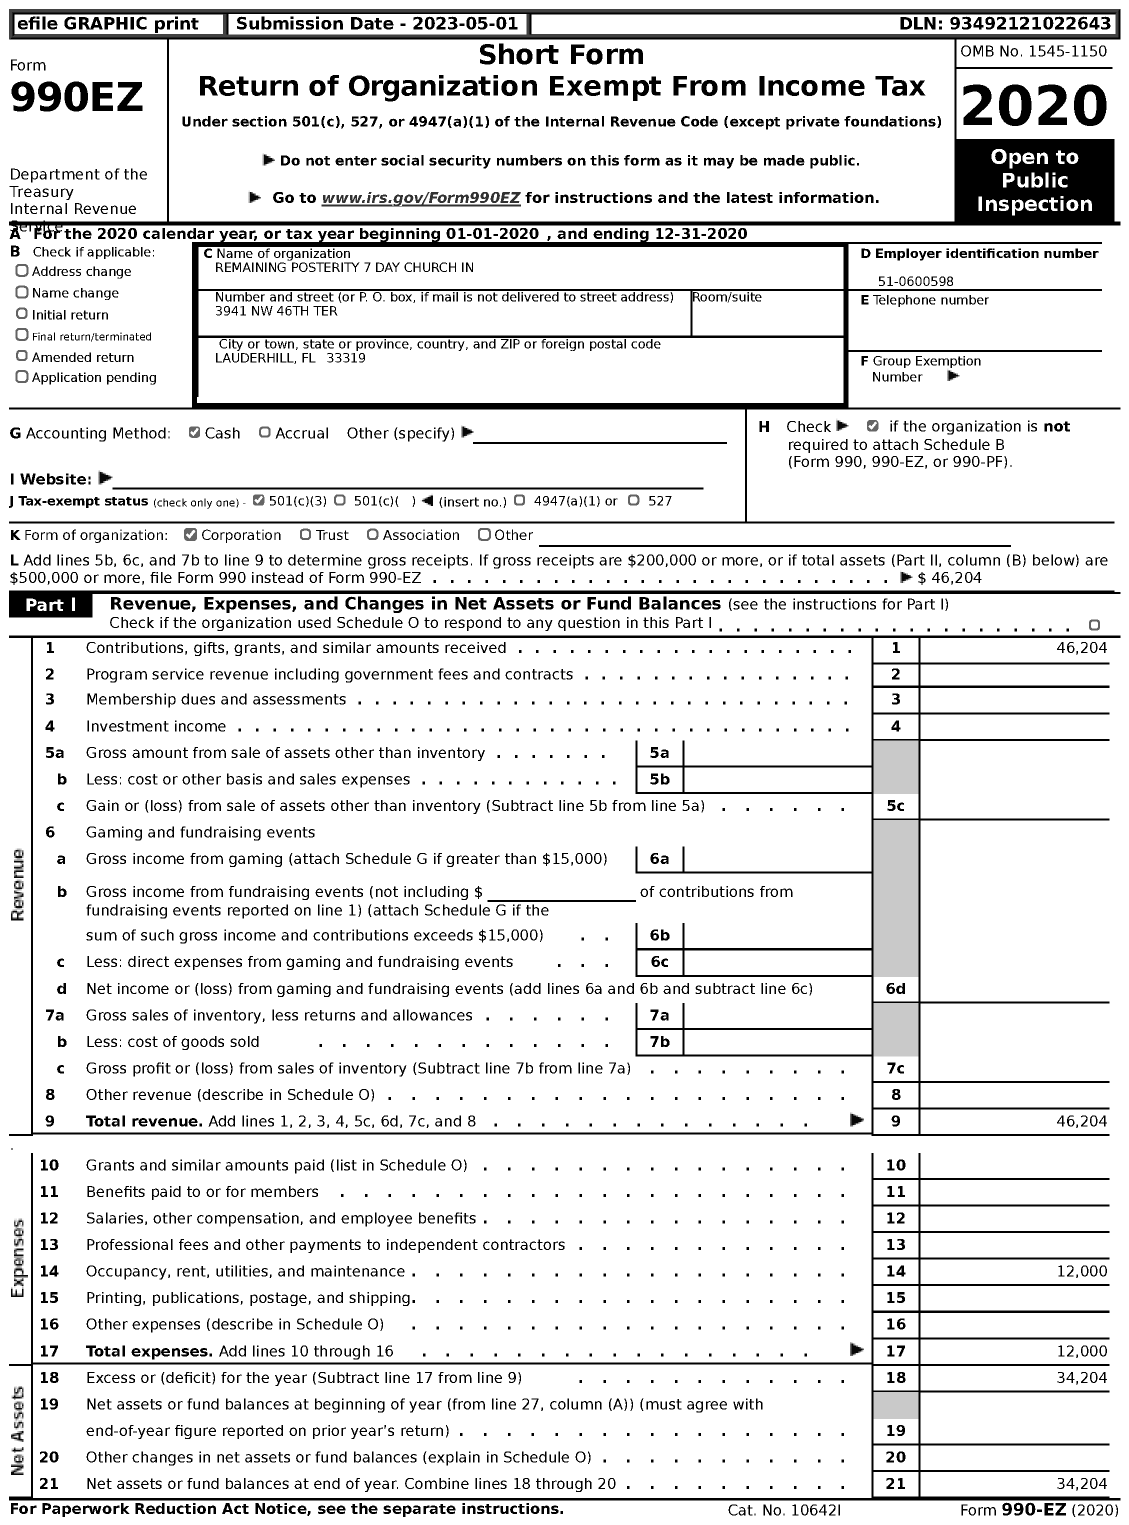 Image of first page of 2020 Form 990EZ for Remaining Posterity 7 Day Church in